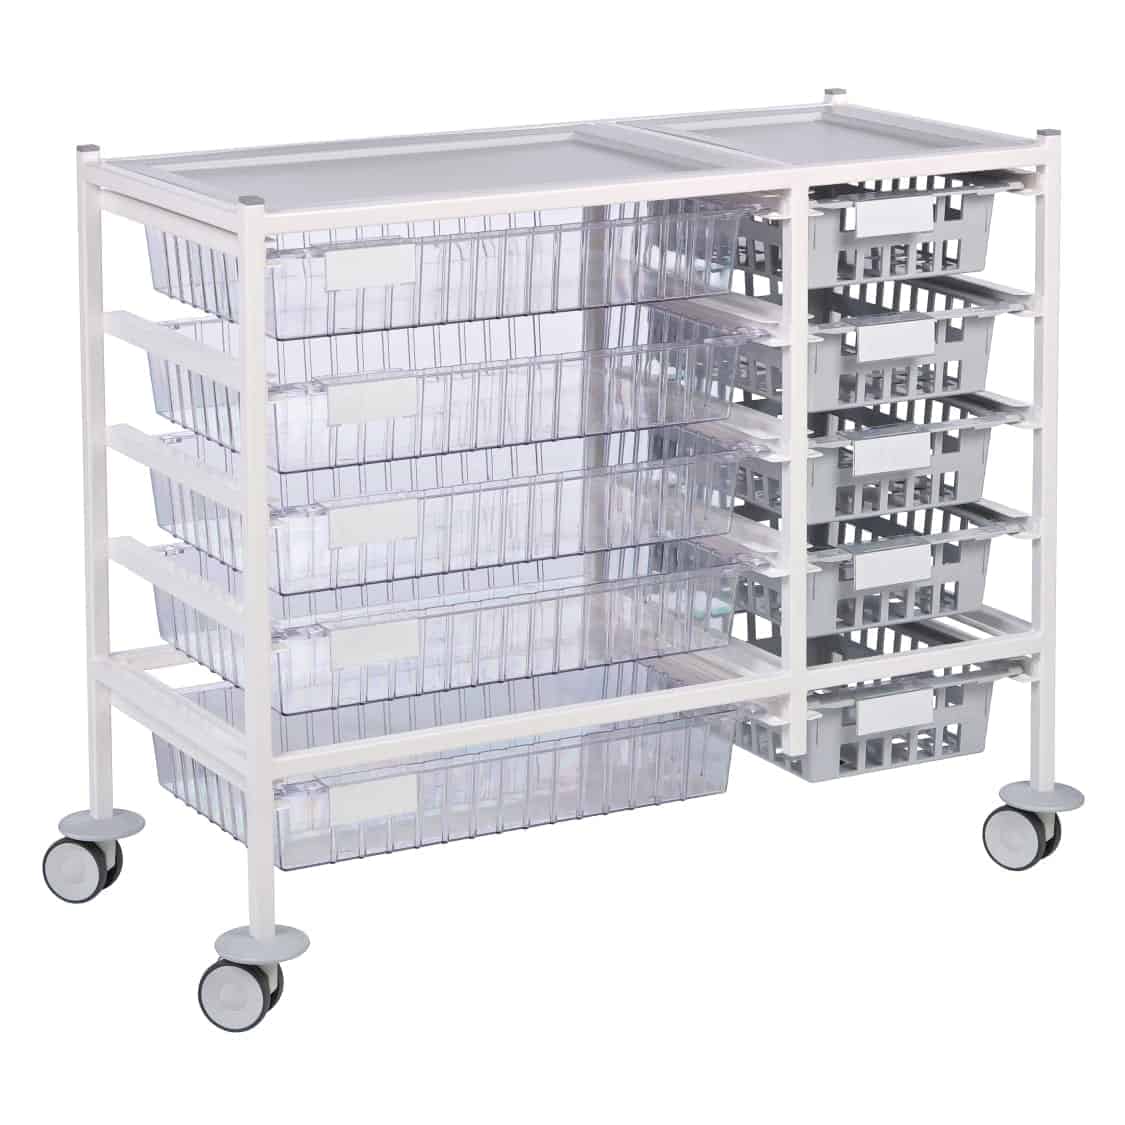 One & Half Section Trolley - Type B